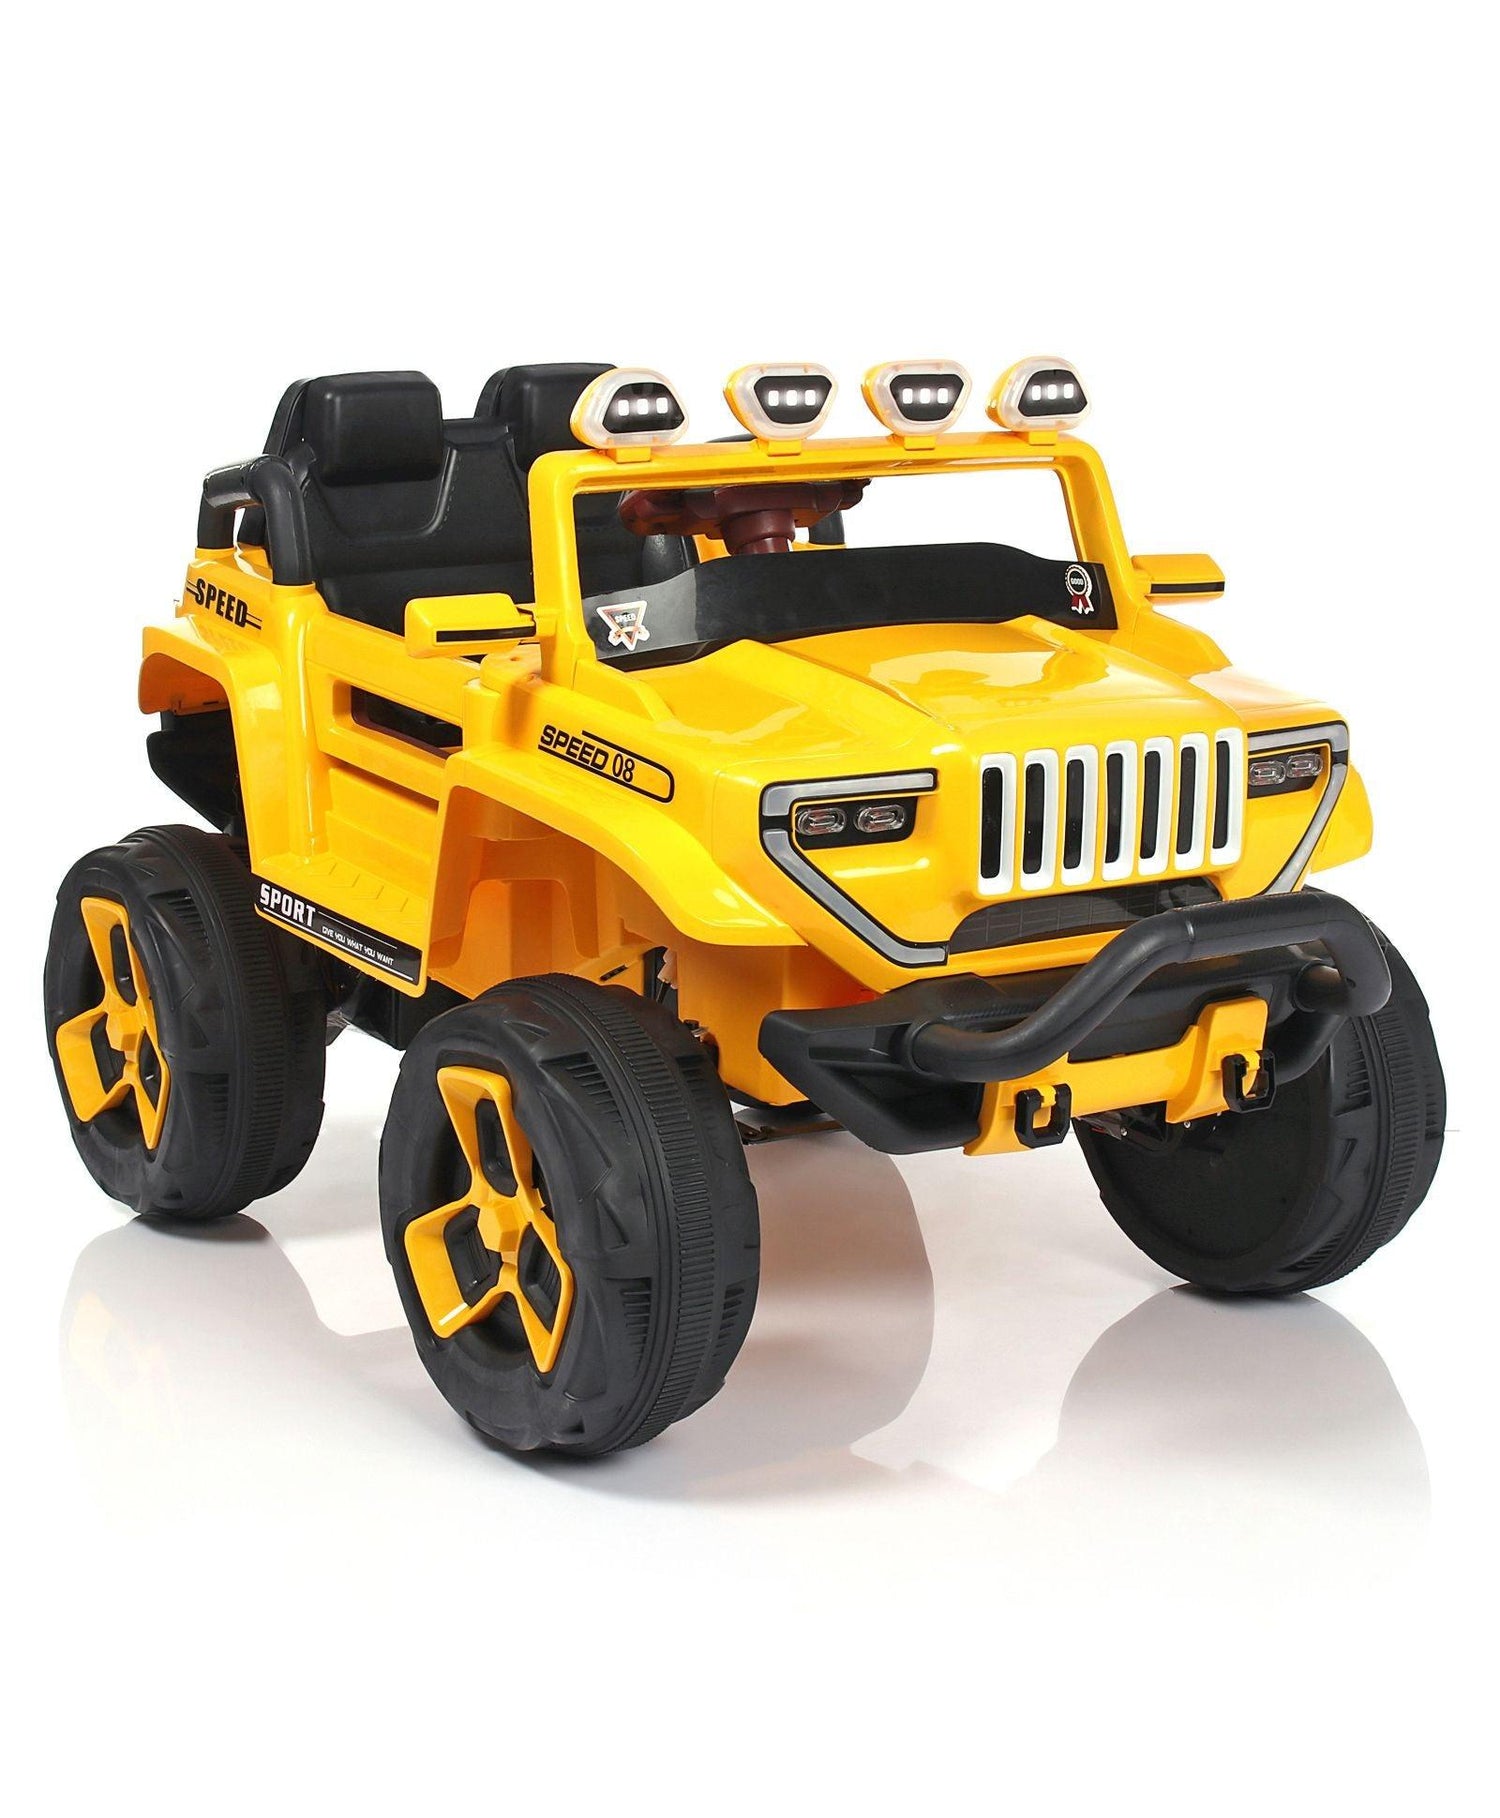 Jumbo-Size A-1200 | Ride-On Yellow 4x4 Battery Operated Jeep For Kids | Make in Gujarat - samstoy.in